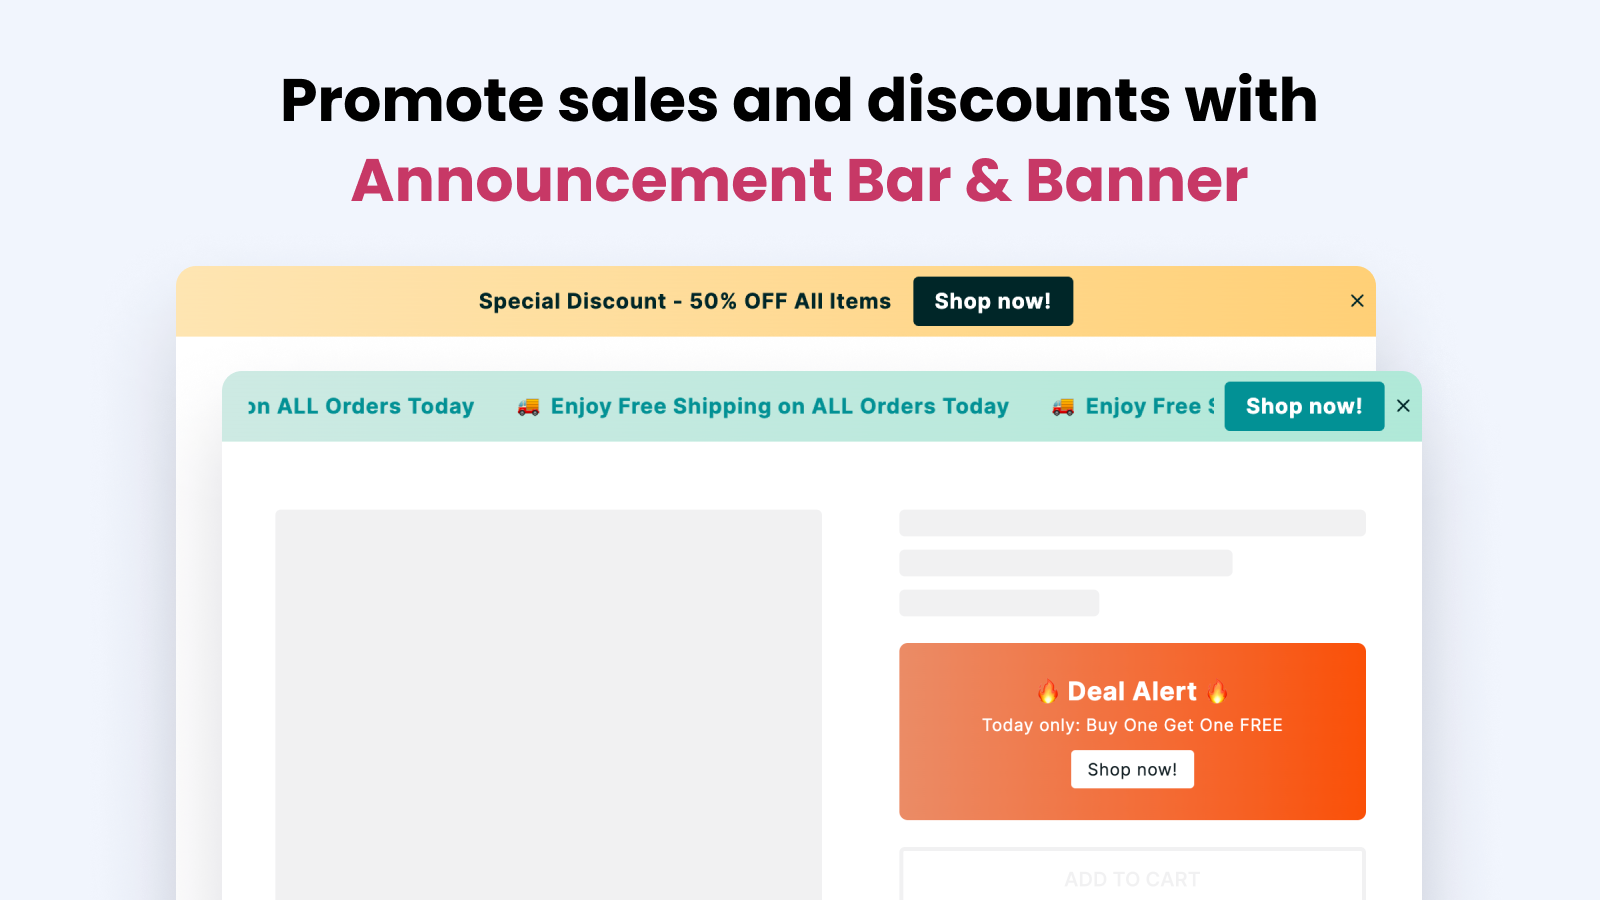 Promote sales and discounts with Announcement Bar & Banner